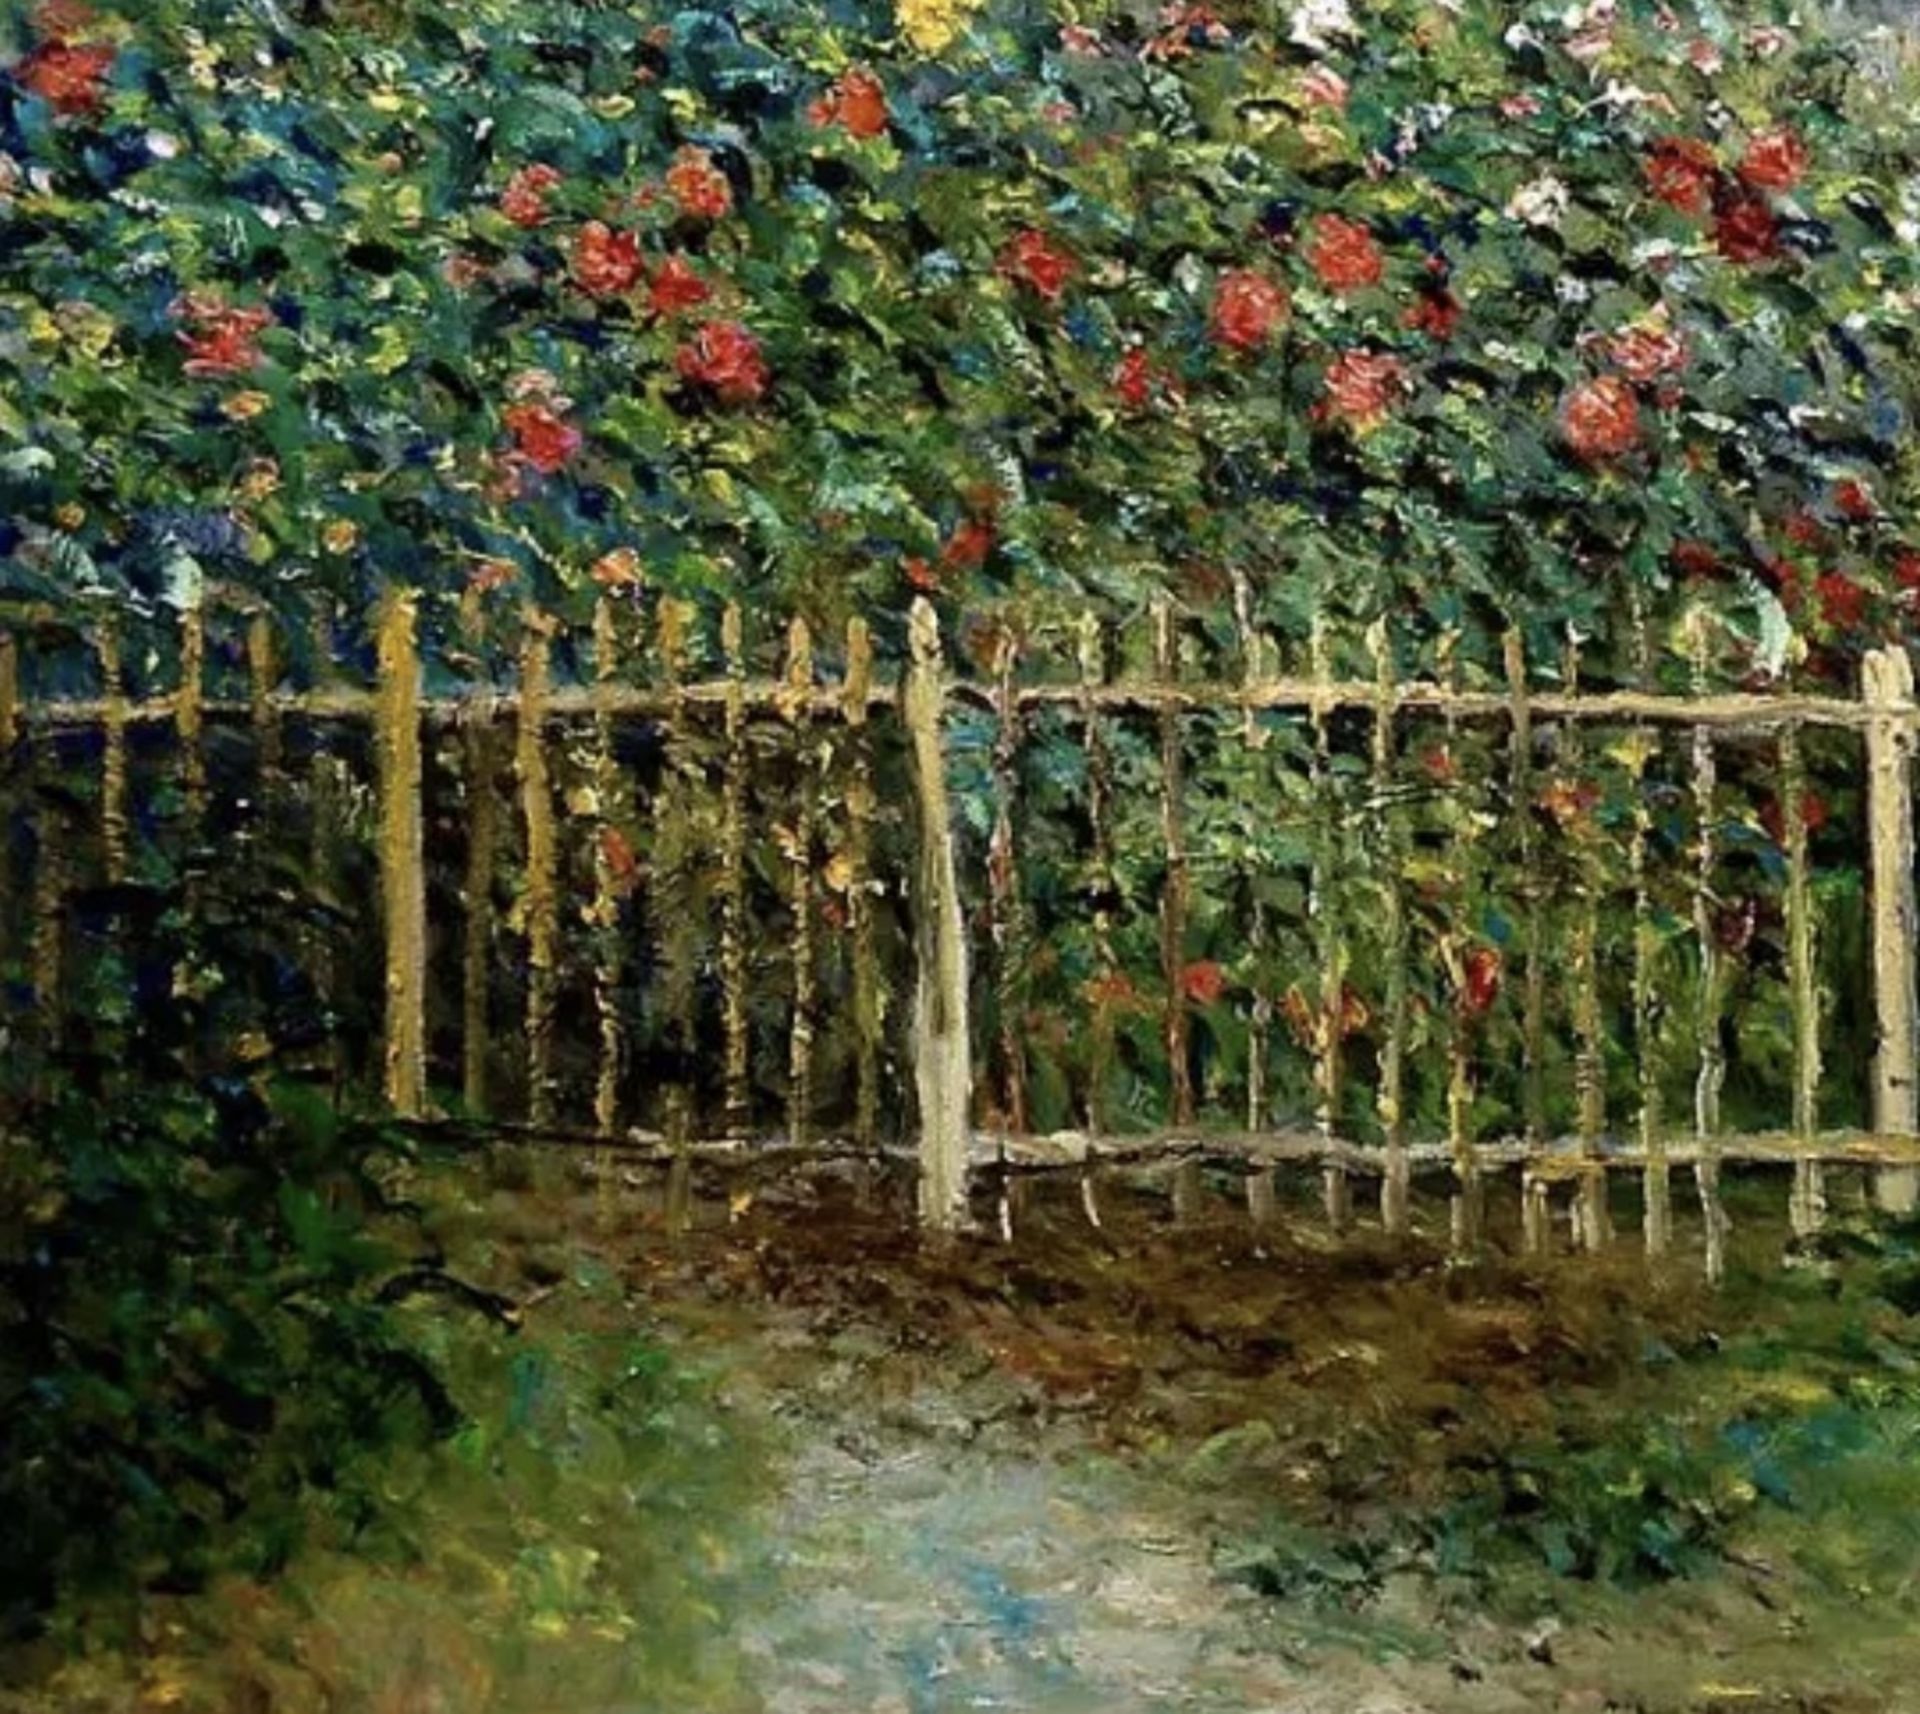 Pierre Auguste Renoir "Monet Painting in His Garden at Argenteuil, 1873" Oil Painting, After - Image 4 of 5